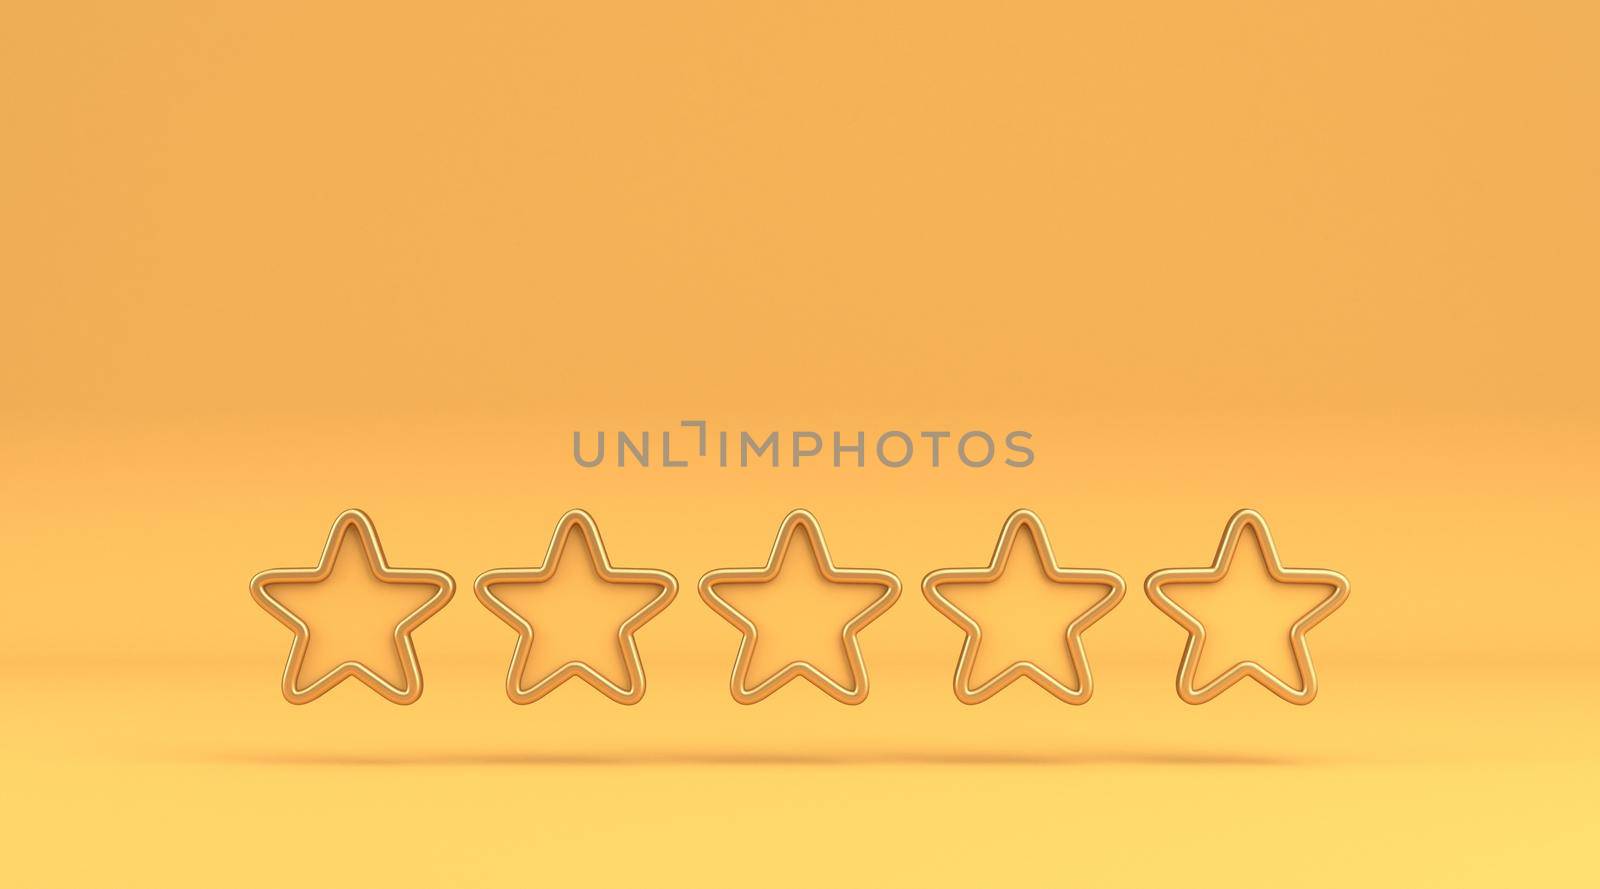 Five framed star rating sign 3D rendering illustration isolated on yellow background